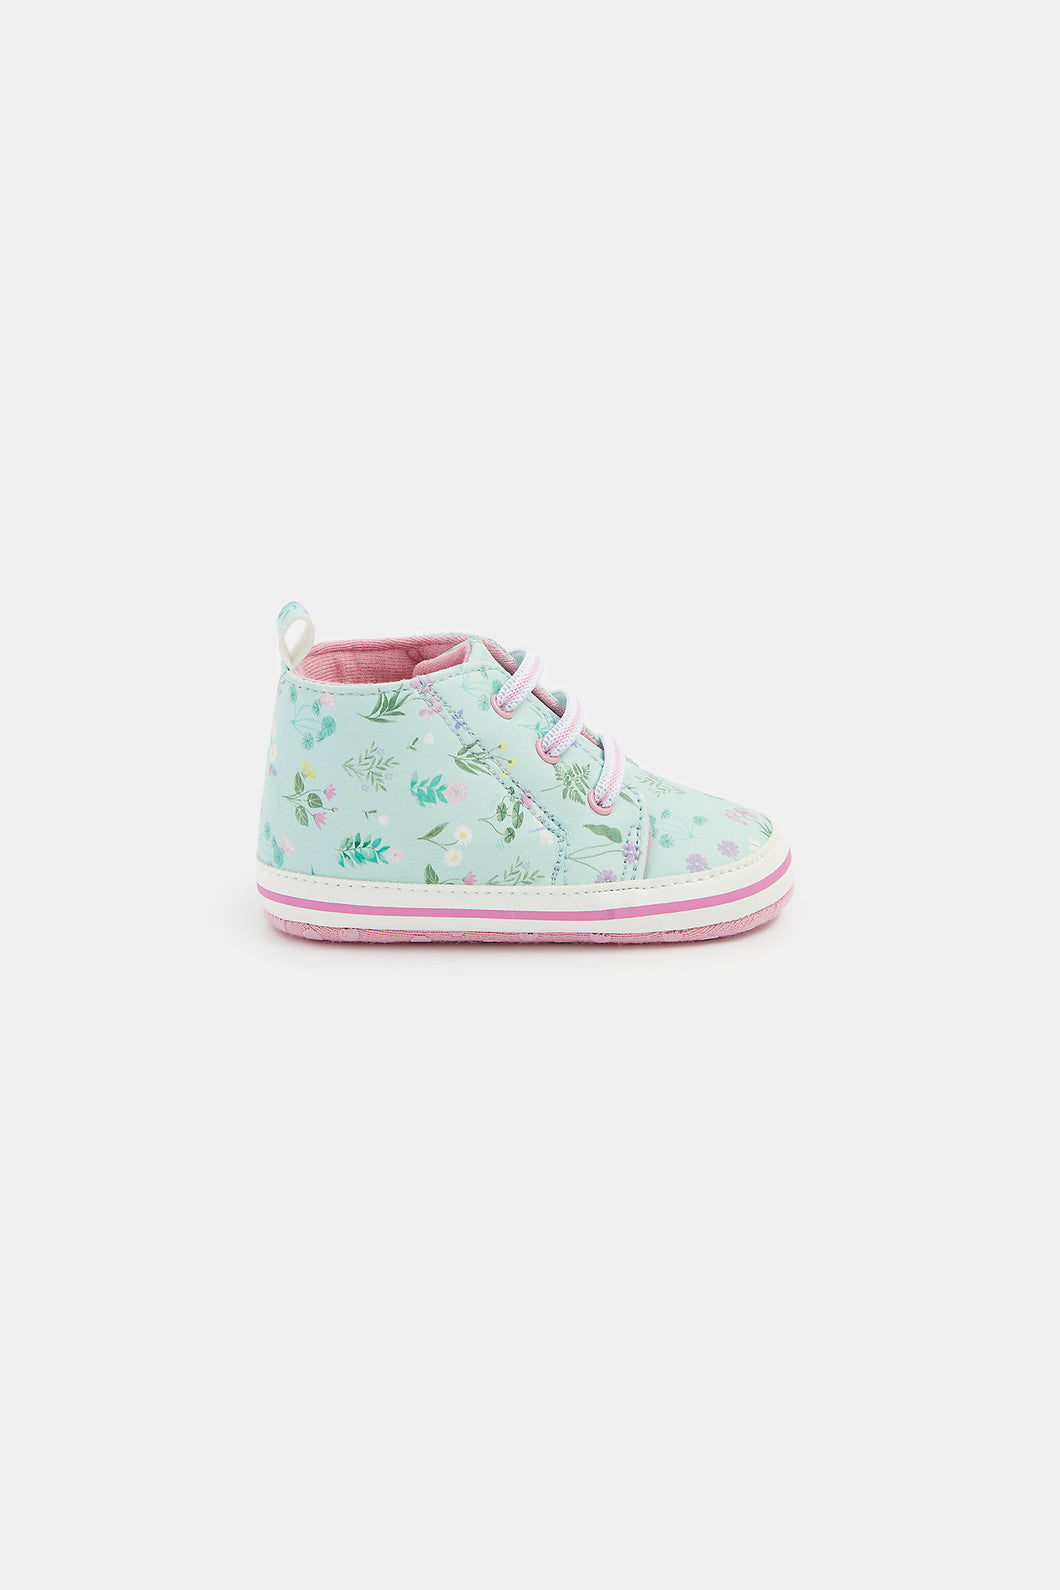 Mothercare Floral Baby Pram Shoes